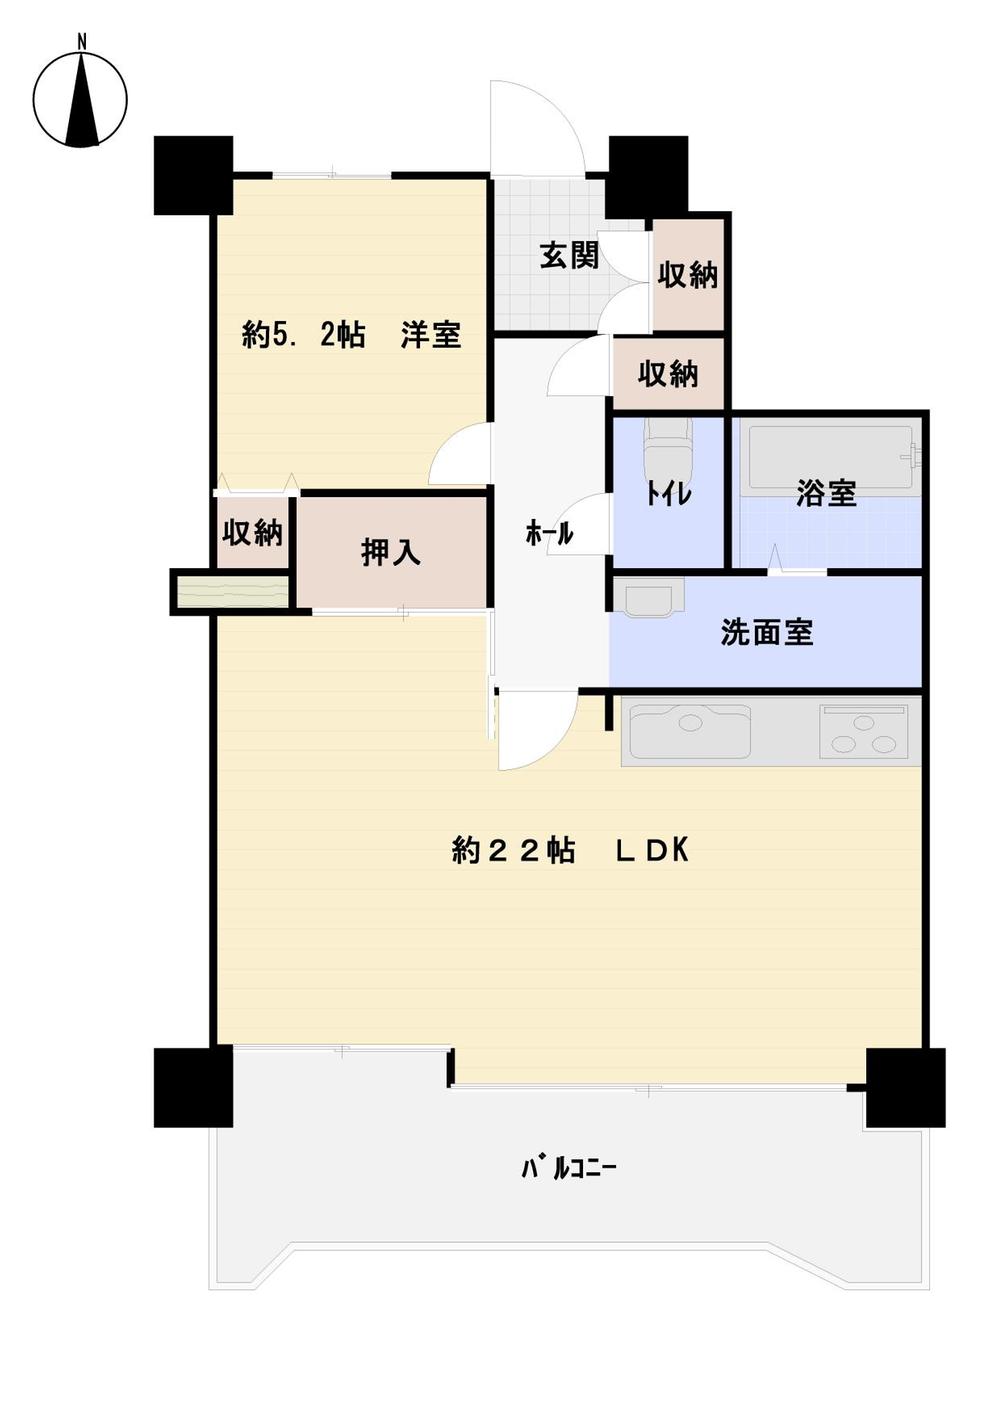 Floor plan. 1LDK, Price 10.3 million yen, Occupied area 58.93 sq m , You can change on the balcony area 9 sq m 2LDK.